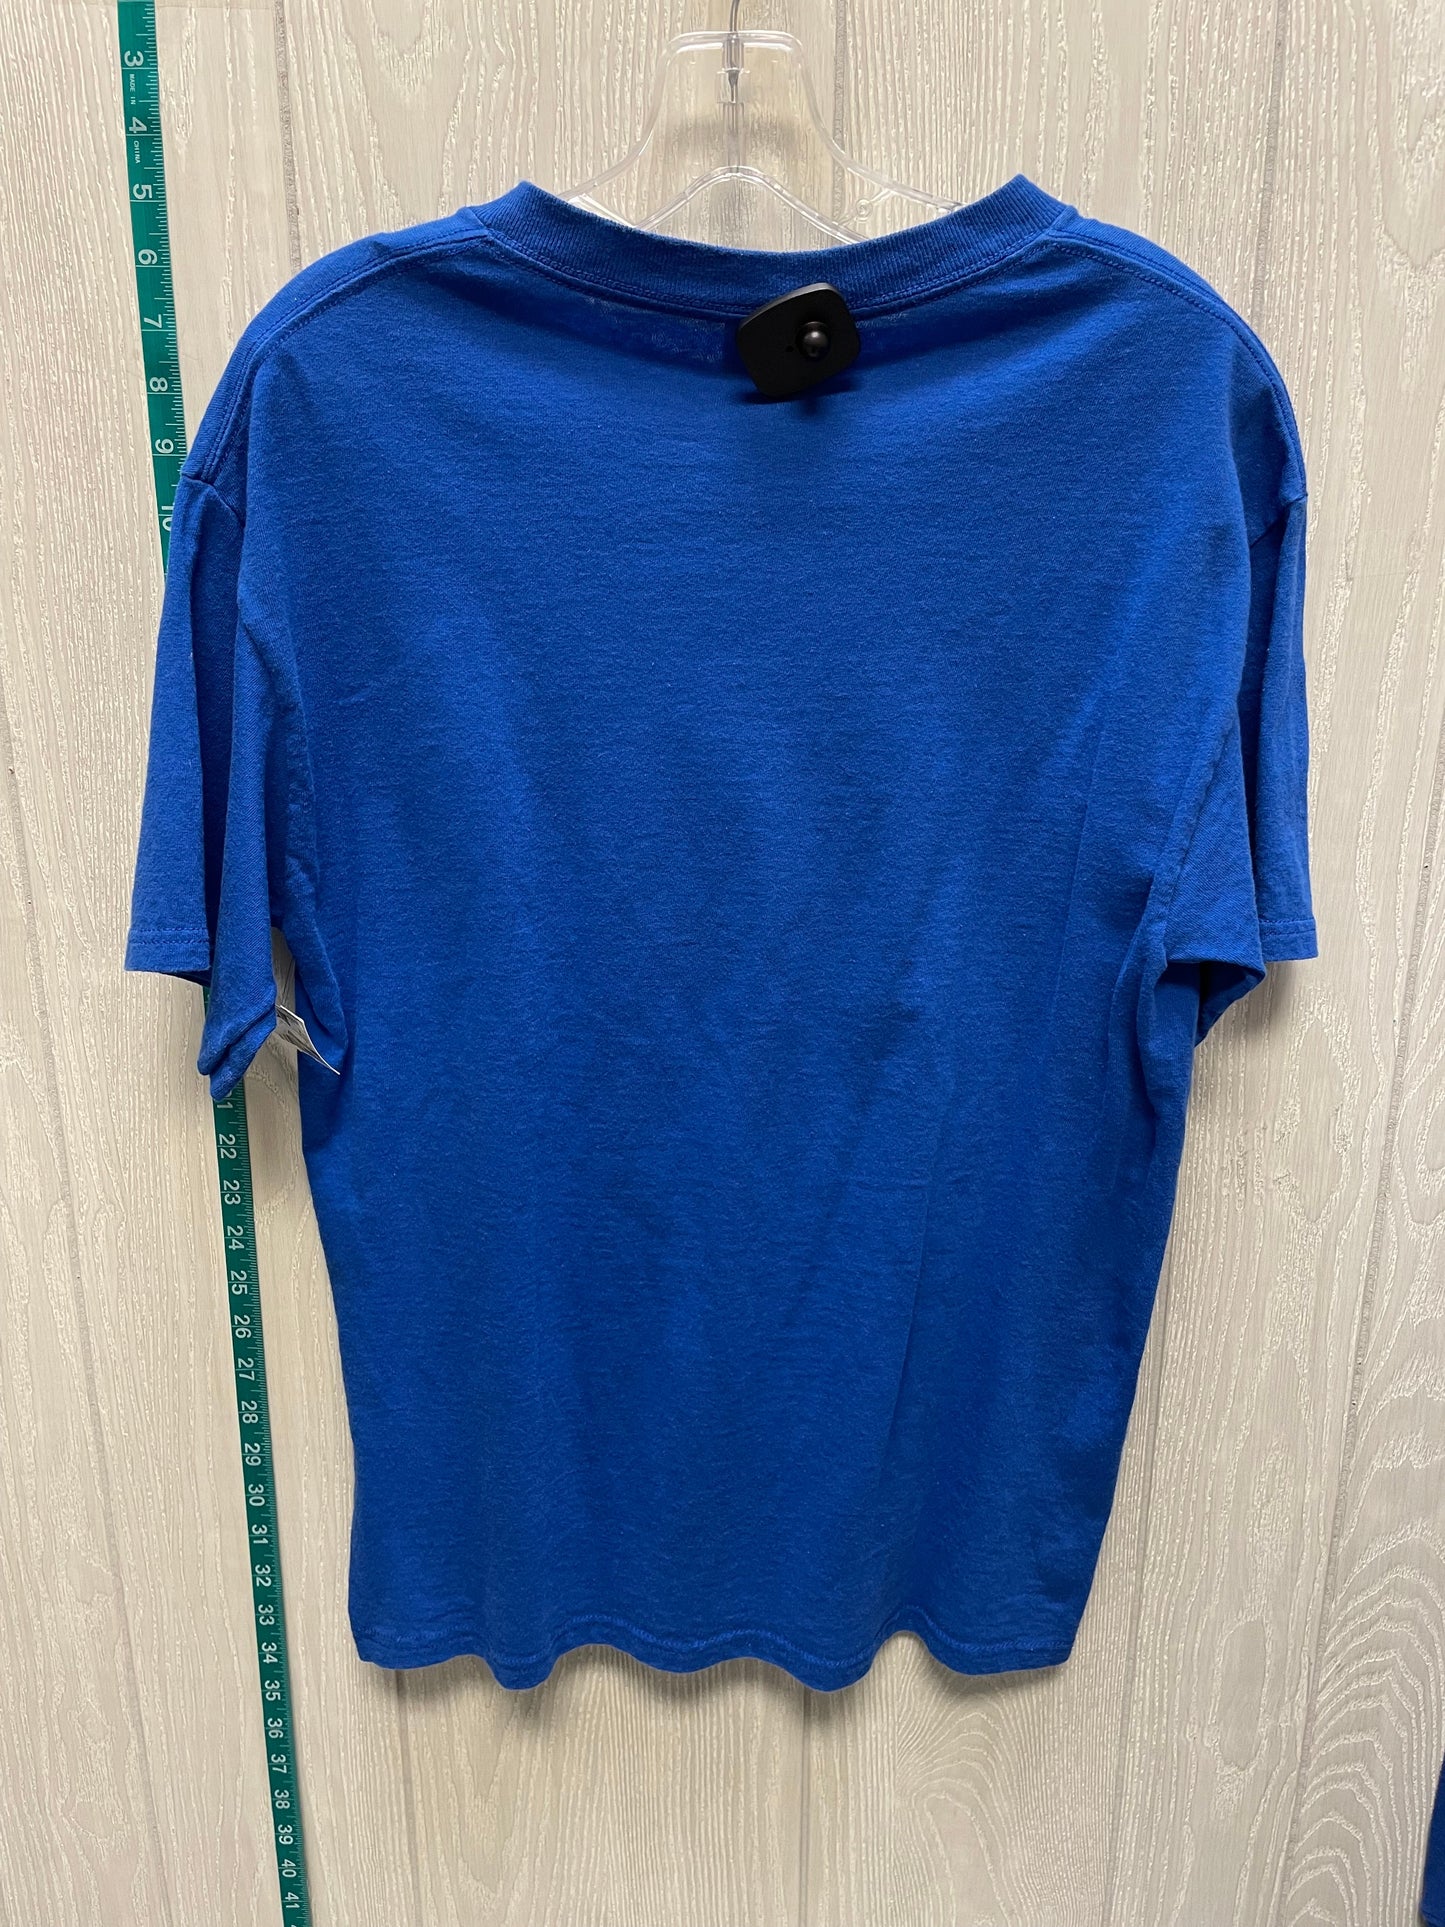 Blue Top Short Sleeve Clothes Mentor, Size M